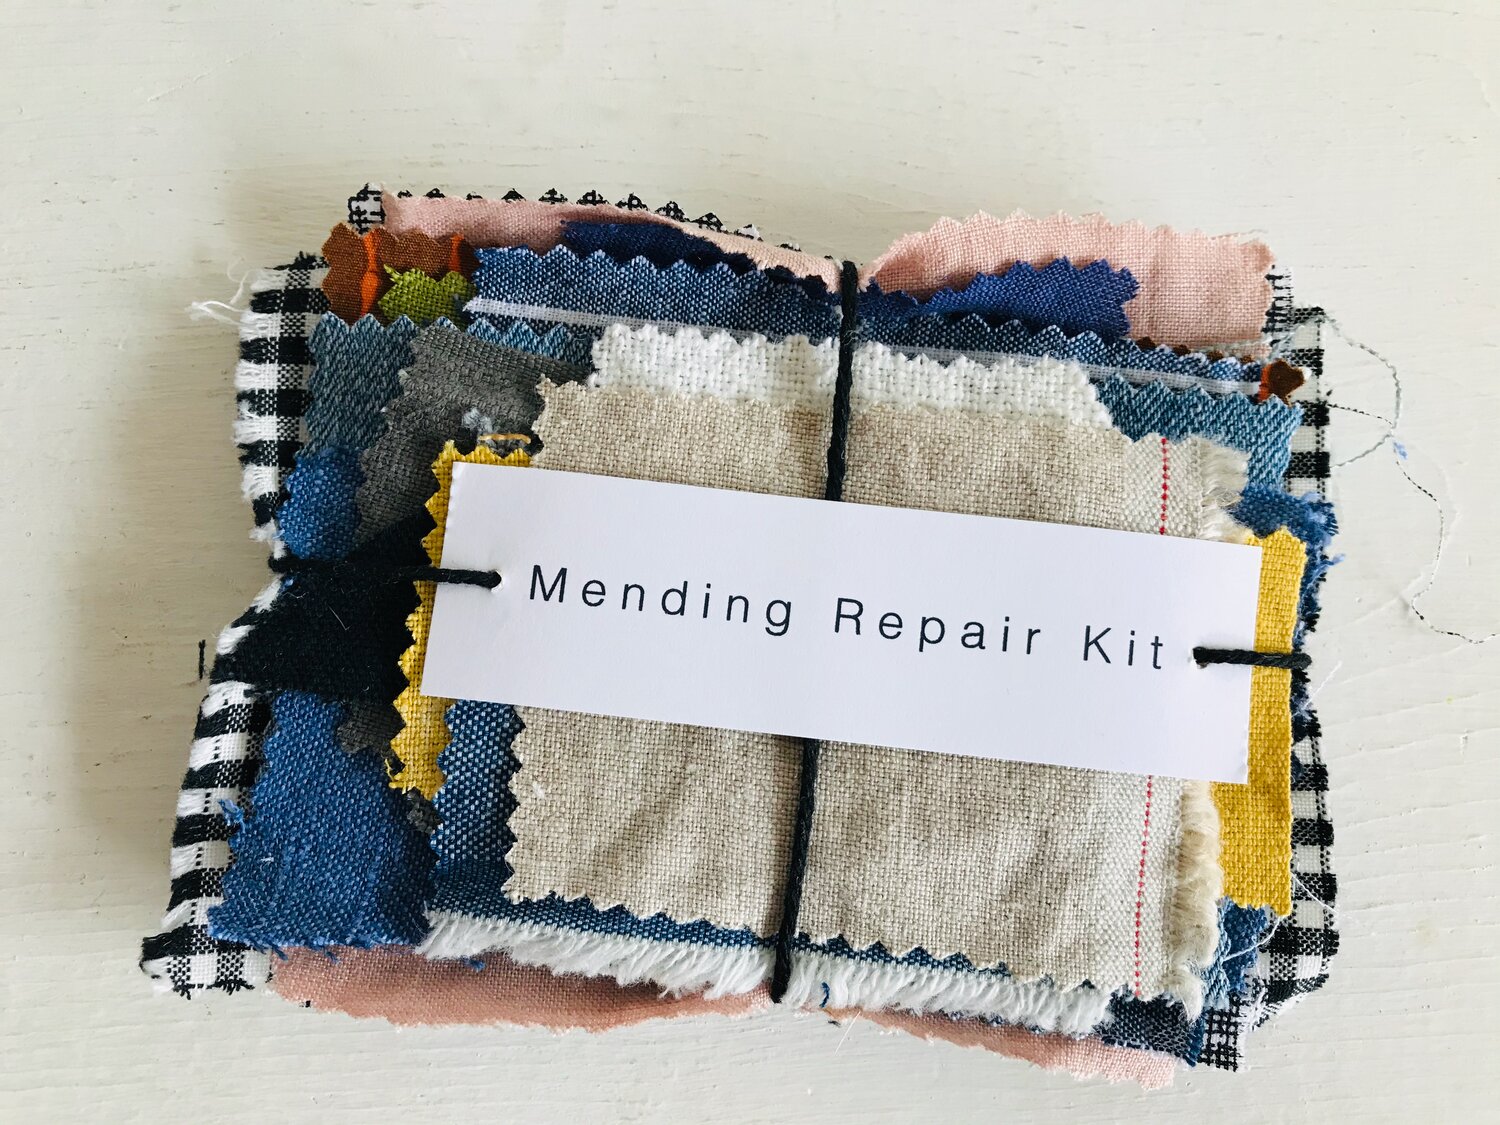 Mending Supplies with Accessories, Leather Sewing Kit for Home